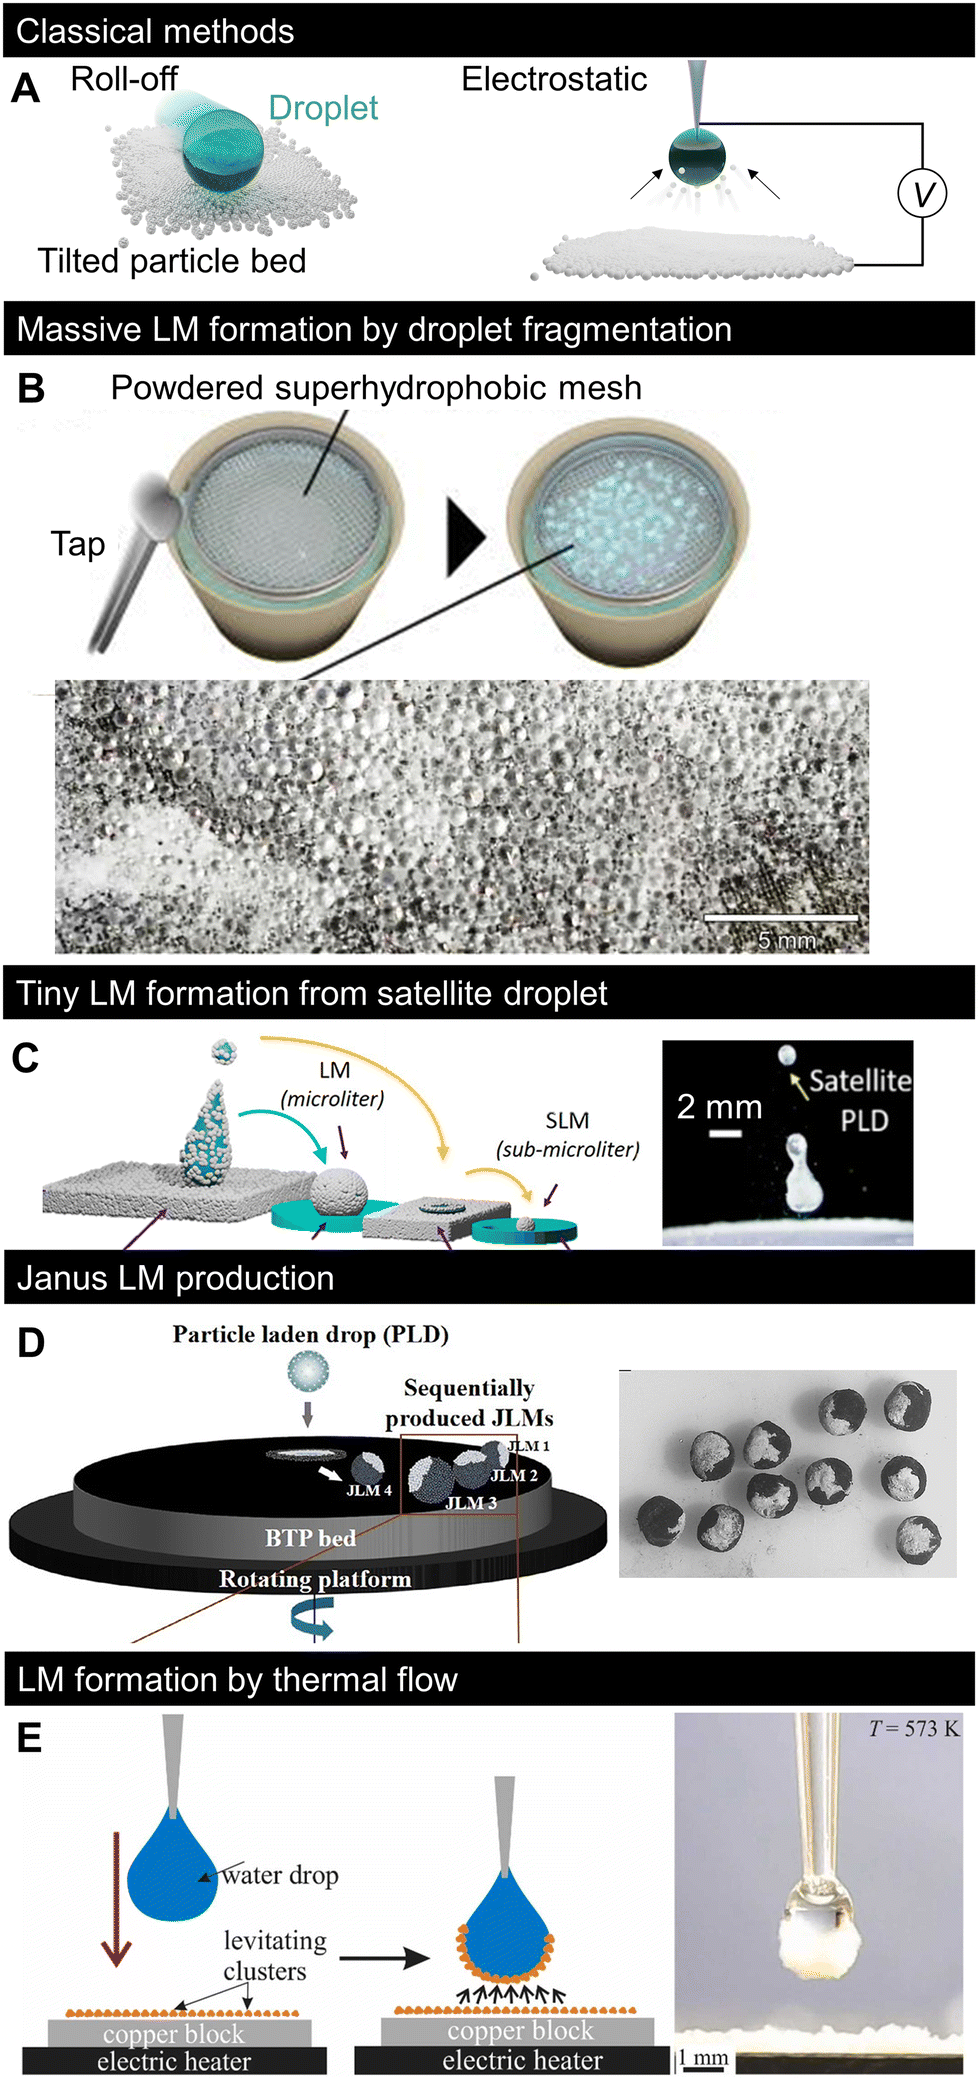 Liquid marbles: review of recent progress in physical properties, formation  techniques, and lab-in-a-marble applications in microreactors and biosenso   - Nanoscale (RSC Publishing) DOI:10.1039/D3NR04966C